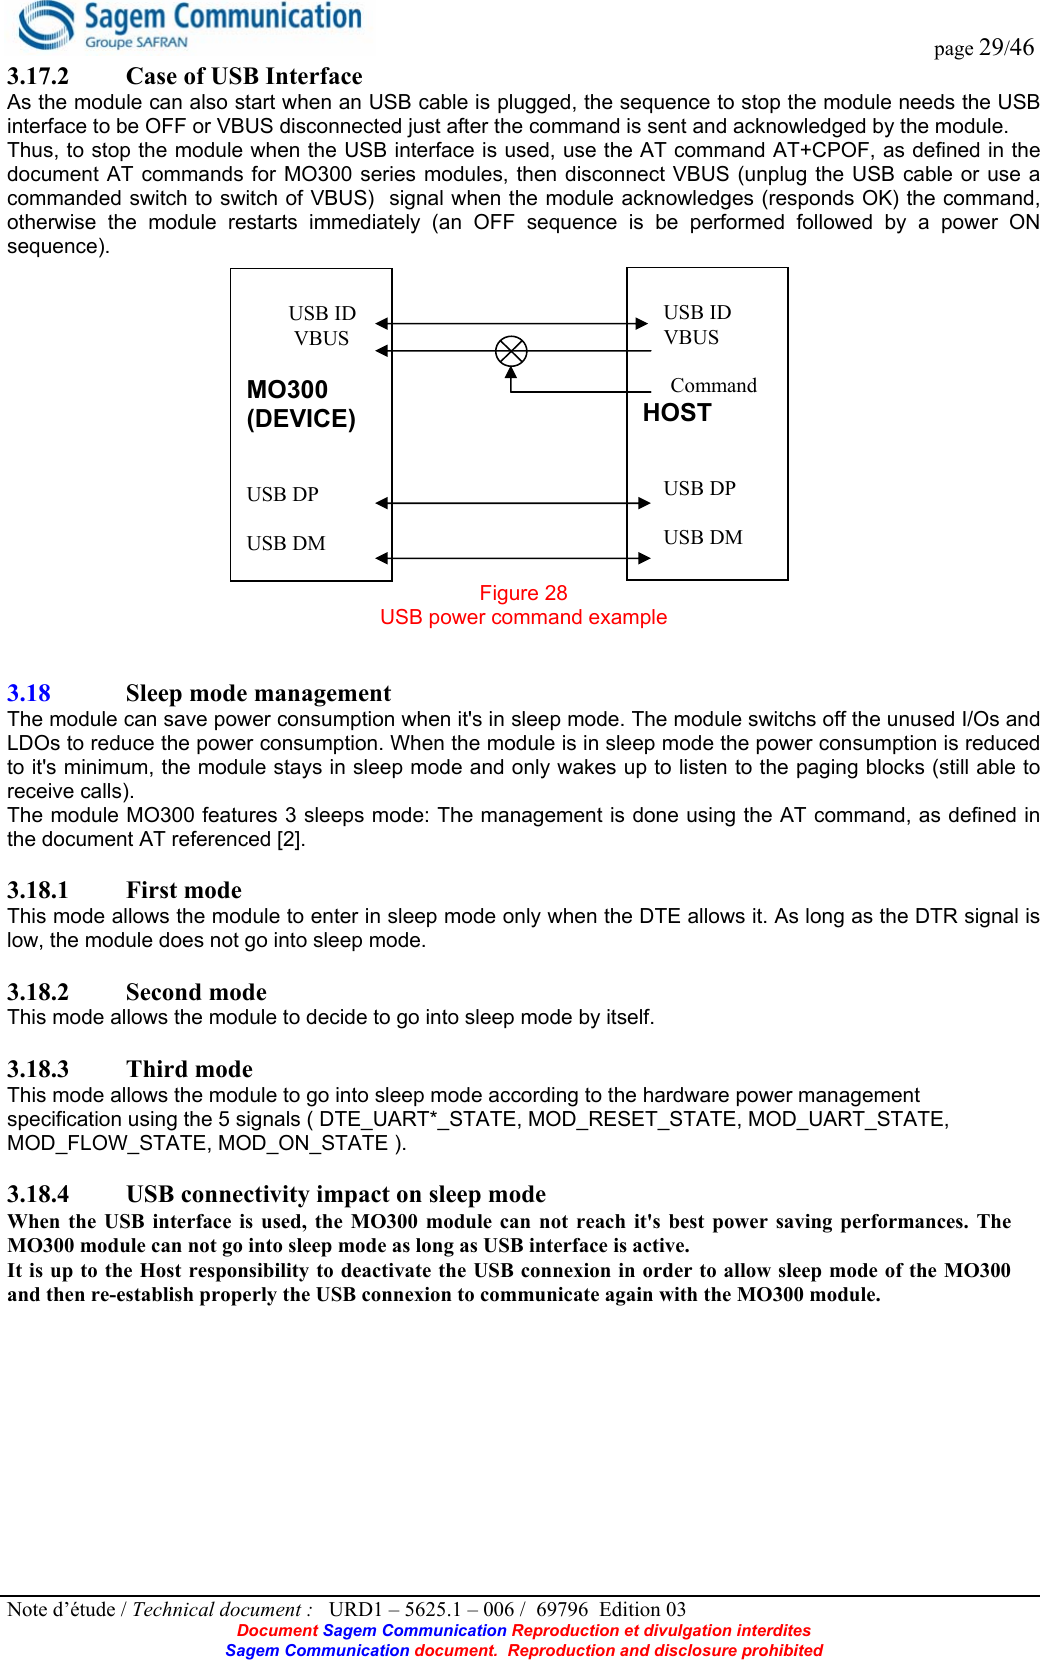  page 29/46 Note d’étude / Technical document :   URD1 – 5625.1 – 006 /  69796  Edition 03 Document Sagem Communication Reproduction et divulgation interdites Sagem Communication document.  Reproduction and disclosure prohibited 3.17.2 Case of USB Interface As the module can also start when an USB cable is plugged, the sequence to stop the module needs the USB interface to be OFF or VBUS disconnected just after the command is sent and acknowledged by the module. Thus, to stop the module when the USB interface is used, use the AT command AT+CPOF, as defined in the document AT commands for MO300 series modules, then disconnect VBUS (unplug the USB cable or use a commanded switch to switch of VBUS)  signal when the module acknowledges (responds OK) the command, otherwise the module restarts immediately (an OFF sequence is be performed followed by a power ON sequence). Figure 28 USB power command example   3.18 Sleep mode management  The module can save power consumption when it&apos;s in sleep mode. The module switchs off the unused I/Os and LDOs to reduce the power consumption. When the module is in sleep mode the power consumption is reduced to it&apos;s minimum, the module stays in sleep mode and only wakes up to listen to the paging blocks (still able to receive calls). The module MO300 features 3 sleeps mode: The management is done using the AT command, as defined in the document AT referenced [2].  3.18.1 First mode This mode allows the module to enter in sleep mode only when the DTE allows it. As long as the DTR signal is low, the module does not go into sleep mode.  3.18.2 Second mode This mode allows the module to decide to go into sleep mode by itself.  3.18.3 Third mode This mode allows the module to go into sleep mode according to the hardware power management specification using the 5 signals ( DTE_UART*_STATE, MOD_RESET_STATE, MOD_UART_STATE, MOD_FLOW_STATE, MOD_ON_STATE ).  3.18.4 USB connectivity impact on sleep mode When the USB interface is used, the MO300 module can not reach it&apos;s best power saving performances. The MO300 module can not go into sleep mode as long as USB interface is active.  It is up to the Host responsibility to deactivate the USB connexion in order to allow sleep mode of the MO300 and then re-establish properly the USB connexion to communicate again with the MO300 module.          USB ID          VBUS  MO300  (DEVICE)   USB DP  USB DM      USB ID     VBUS      Command HOST          USB DP      USB DM 